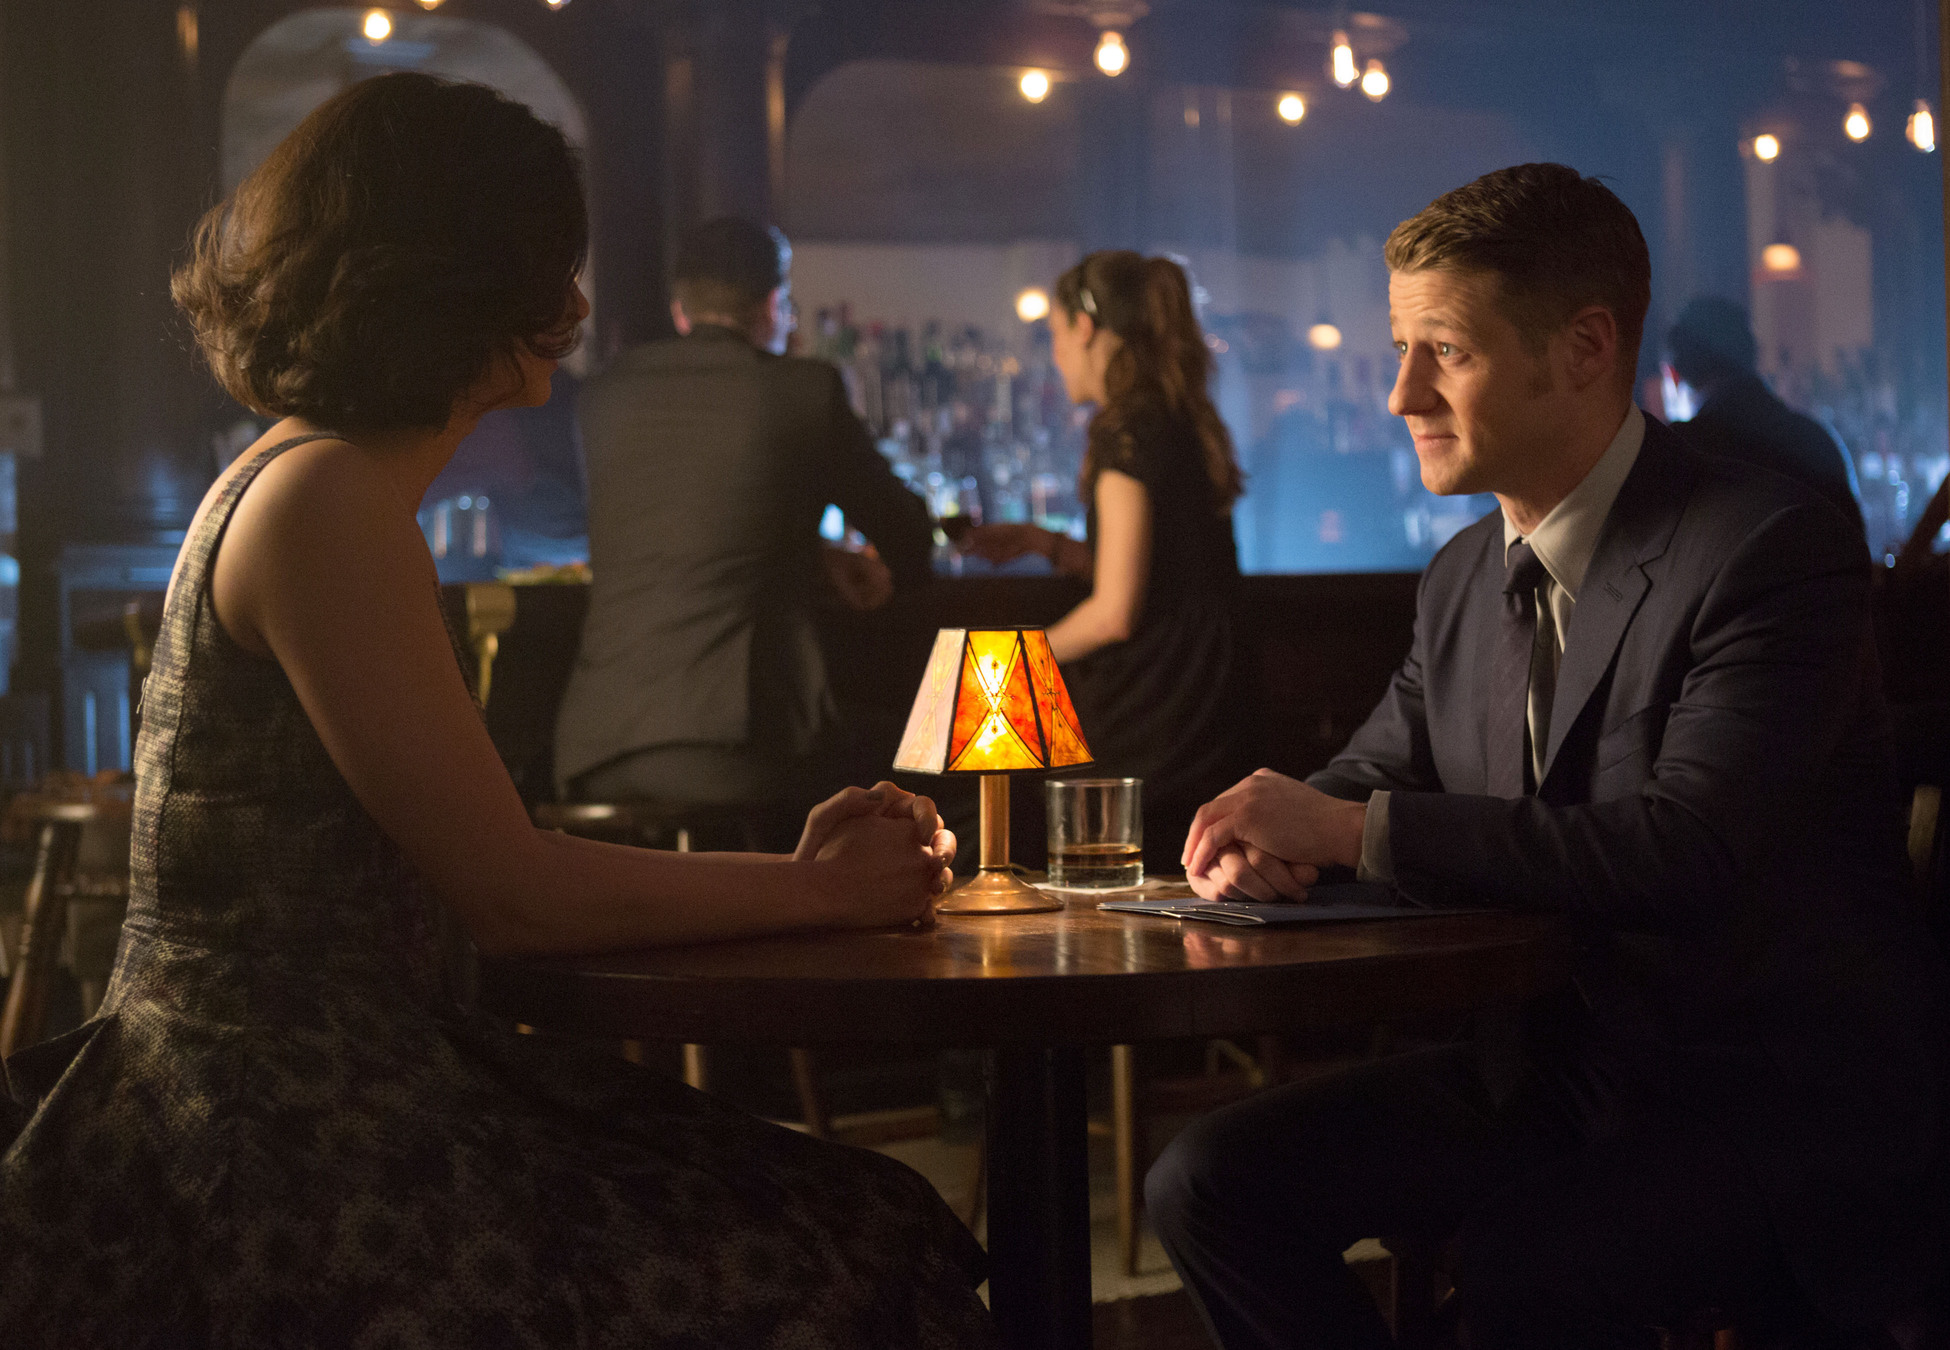 GOTHAM: Detective James Gordon (Ben McKenzie, R) and Dr. Leslie Thompkins (guest star Morena Baccarin, L) go on a date in the "The Fearsome Dr. Crane" episode of GOTHAM airing Monday, Feb. 2 (8:00-9:00 PM ET/PT) on FOX. Â©2015 Fox Broadcasting Co. Cr: Jessica Miglio/FOX